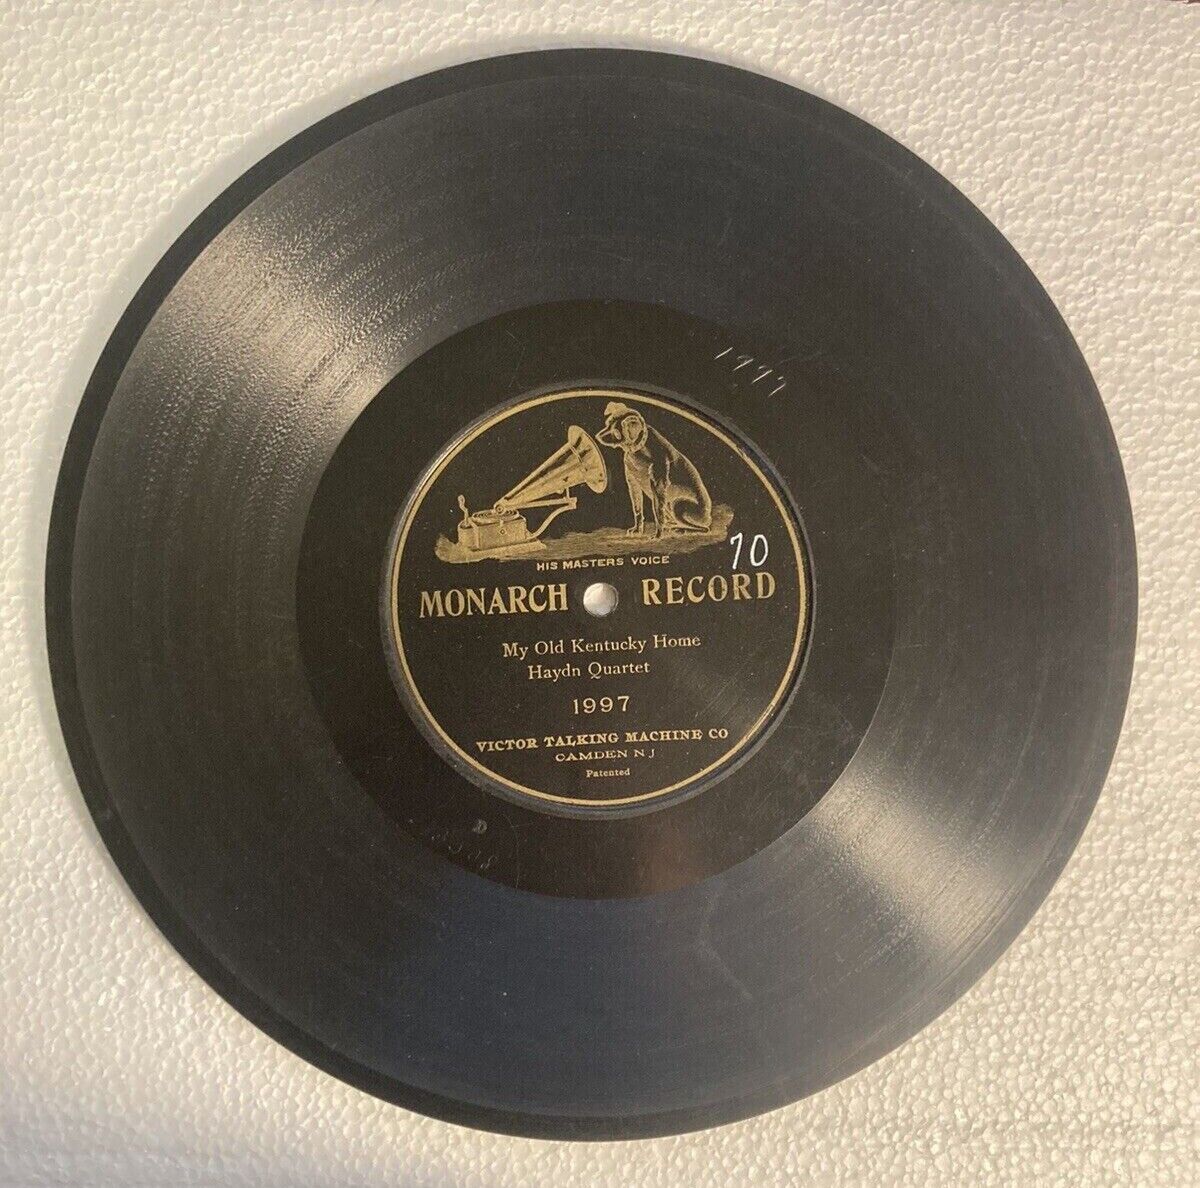 My Old Kentucky Home, Monarch Record 78 RPM by Haydn Quartet